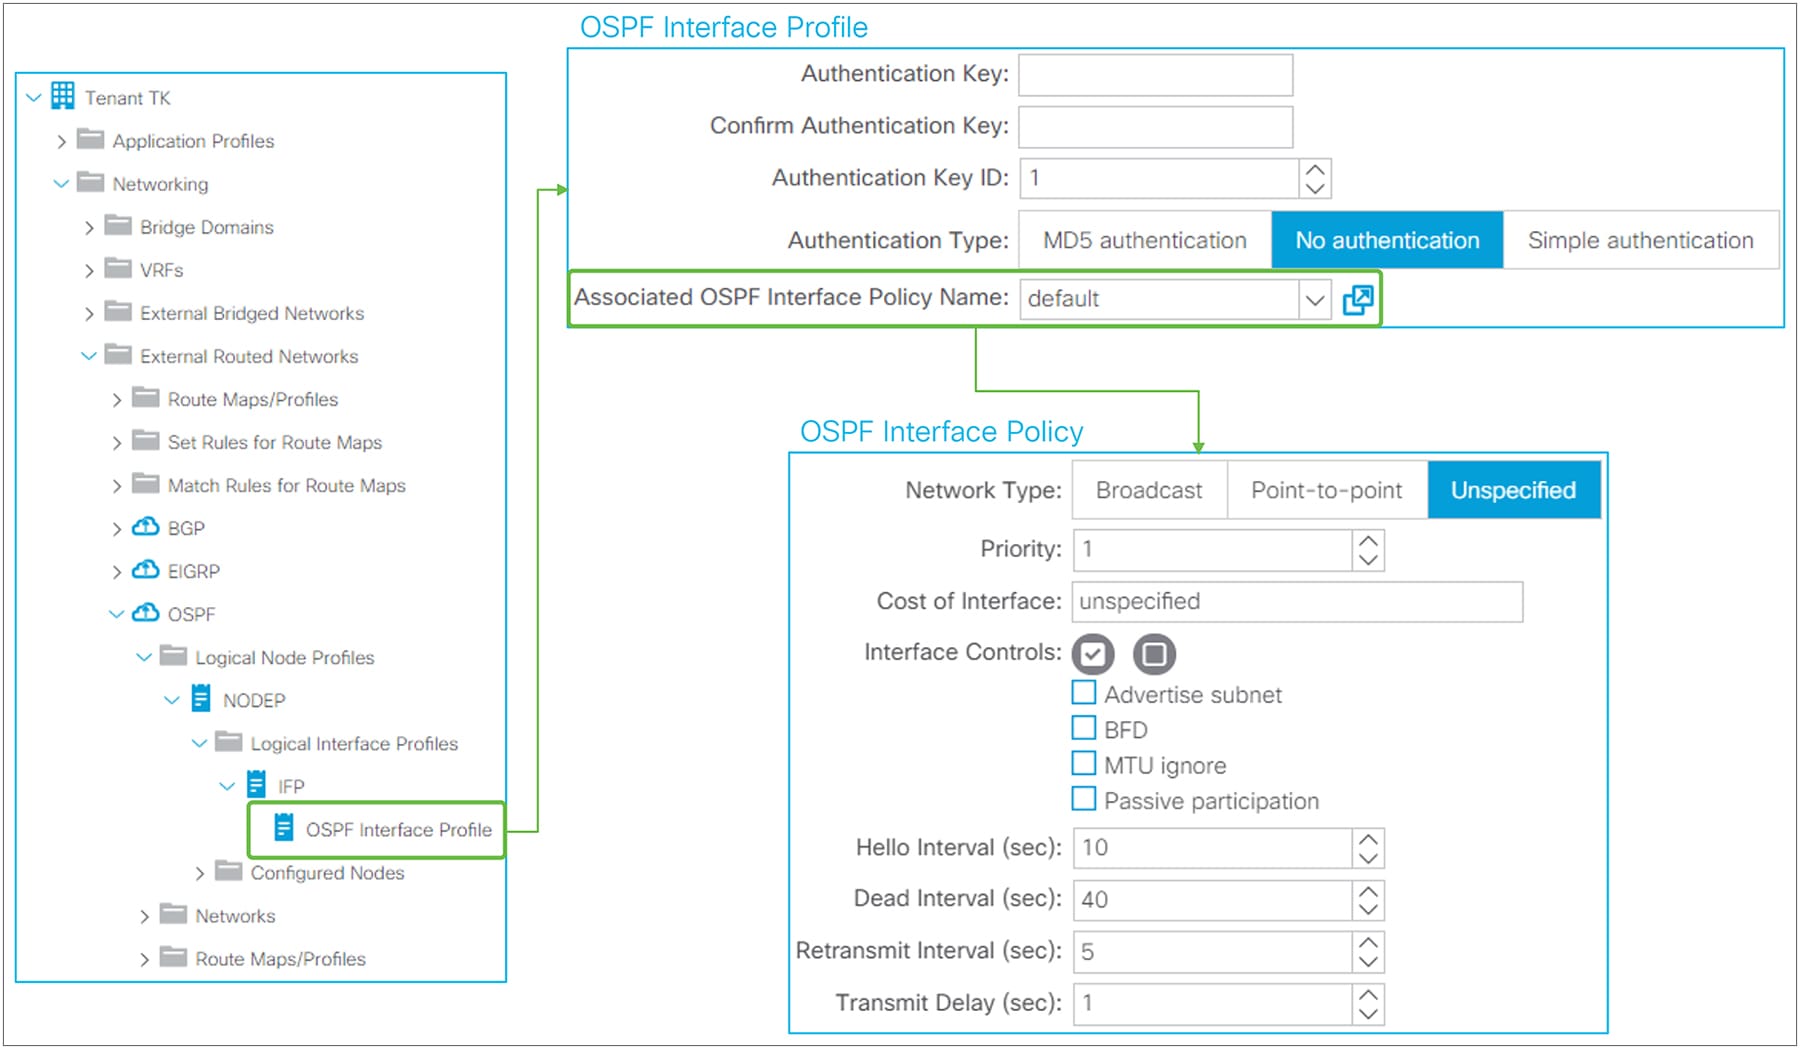 OSPF Interface Profile and Policy in GUI (APIC Release 3.2)